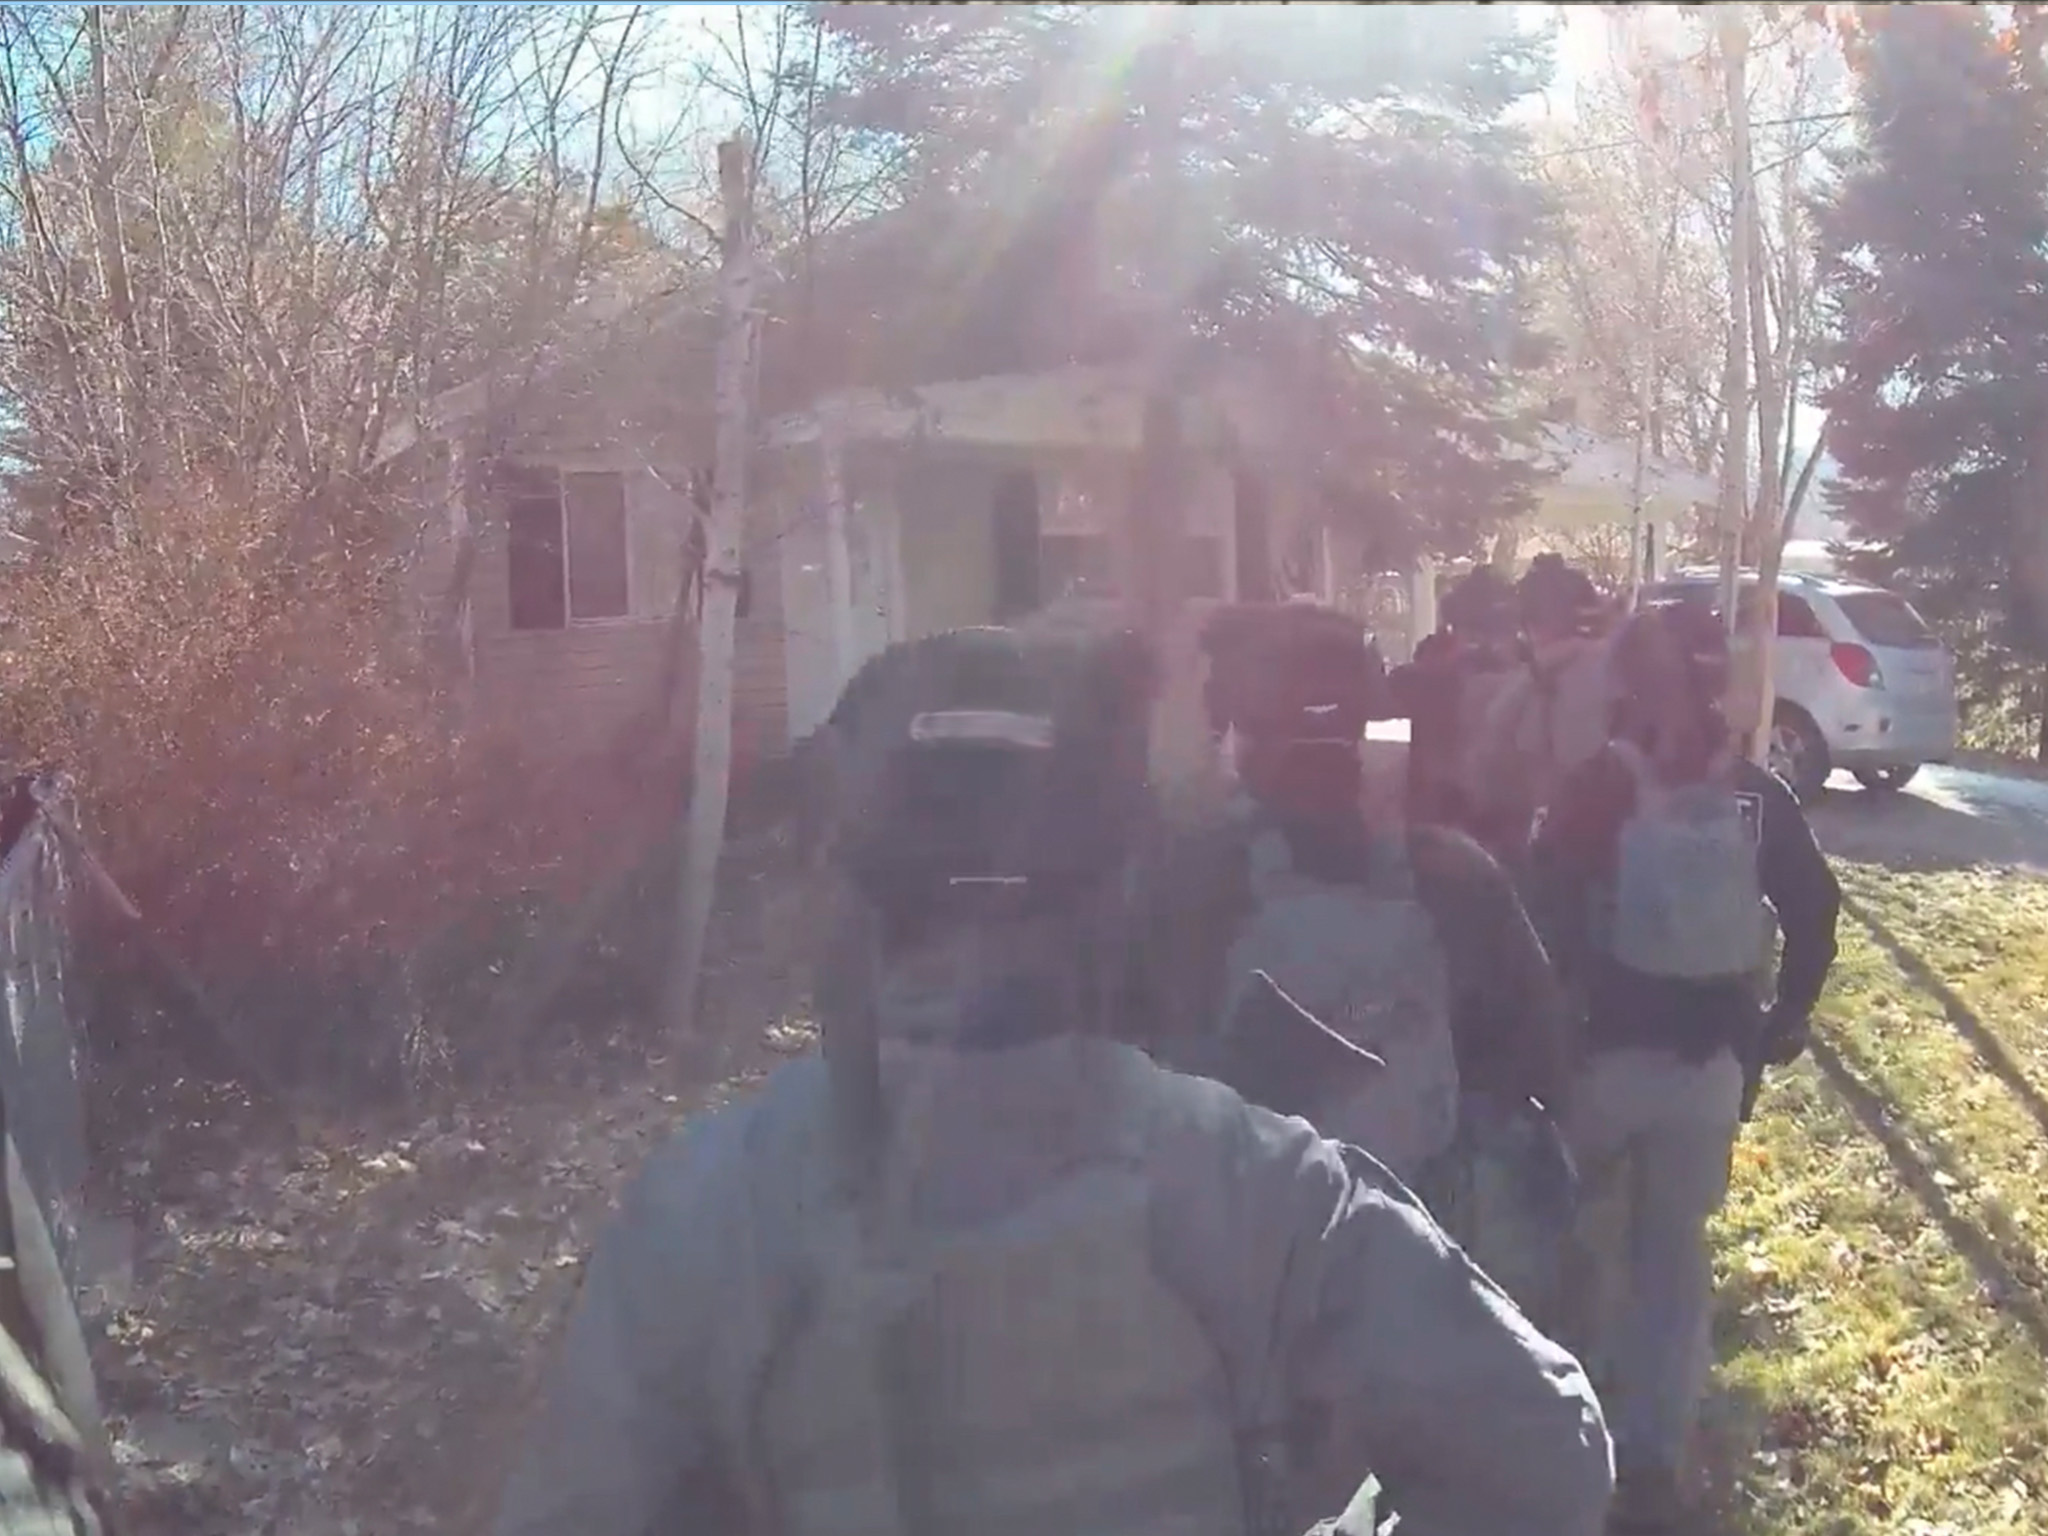 Members of the SERT team approach a house as part of a warrant service